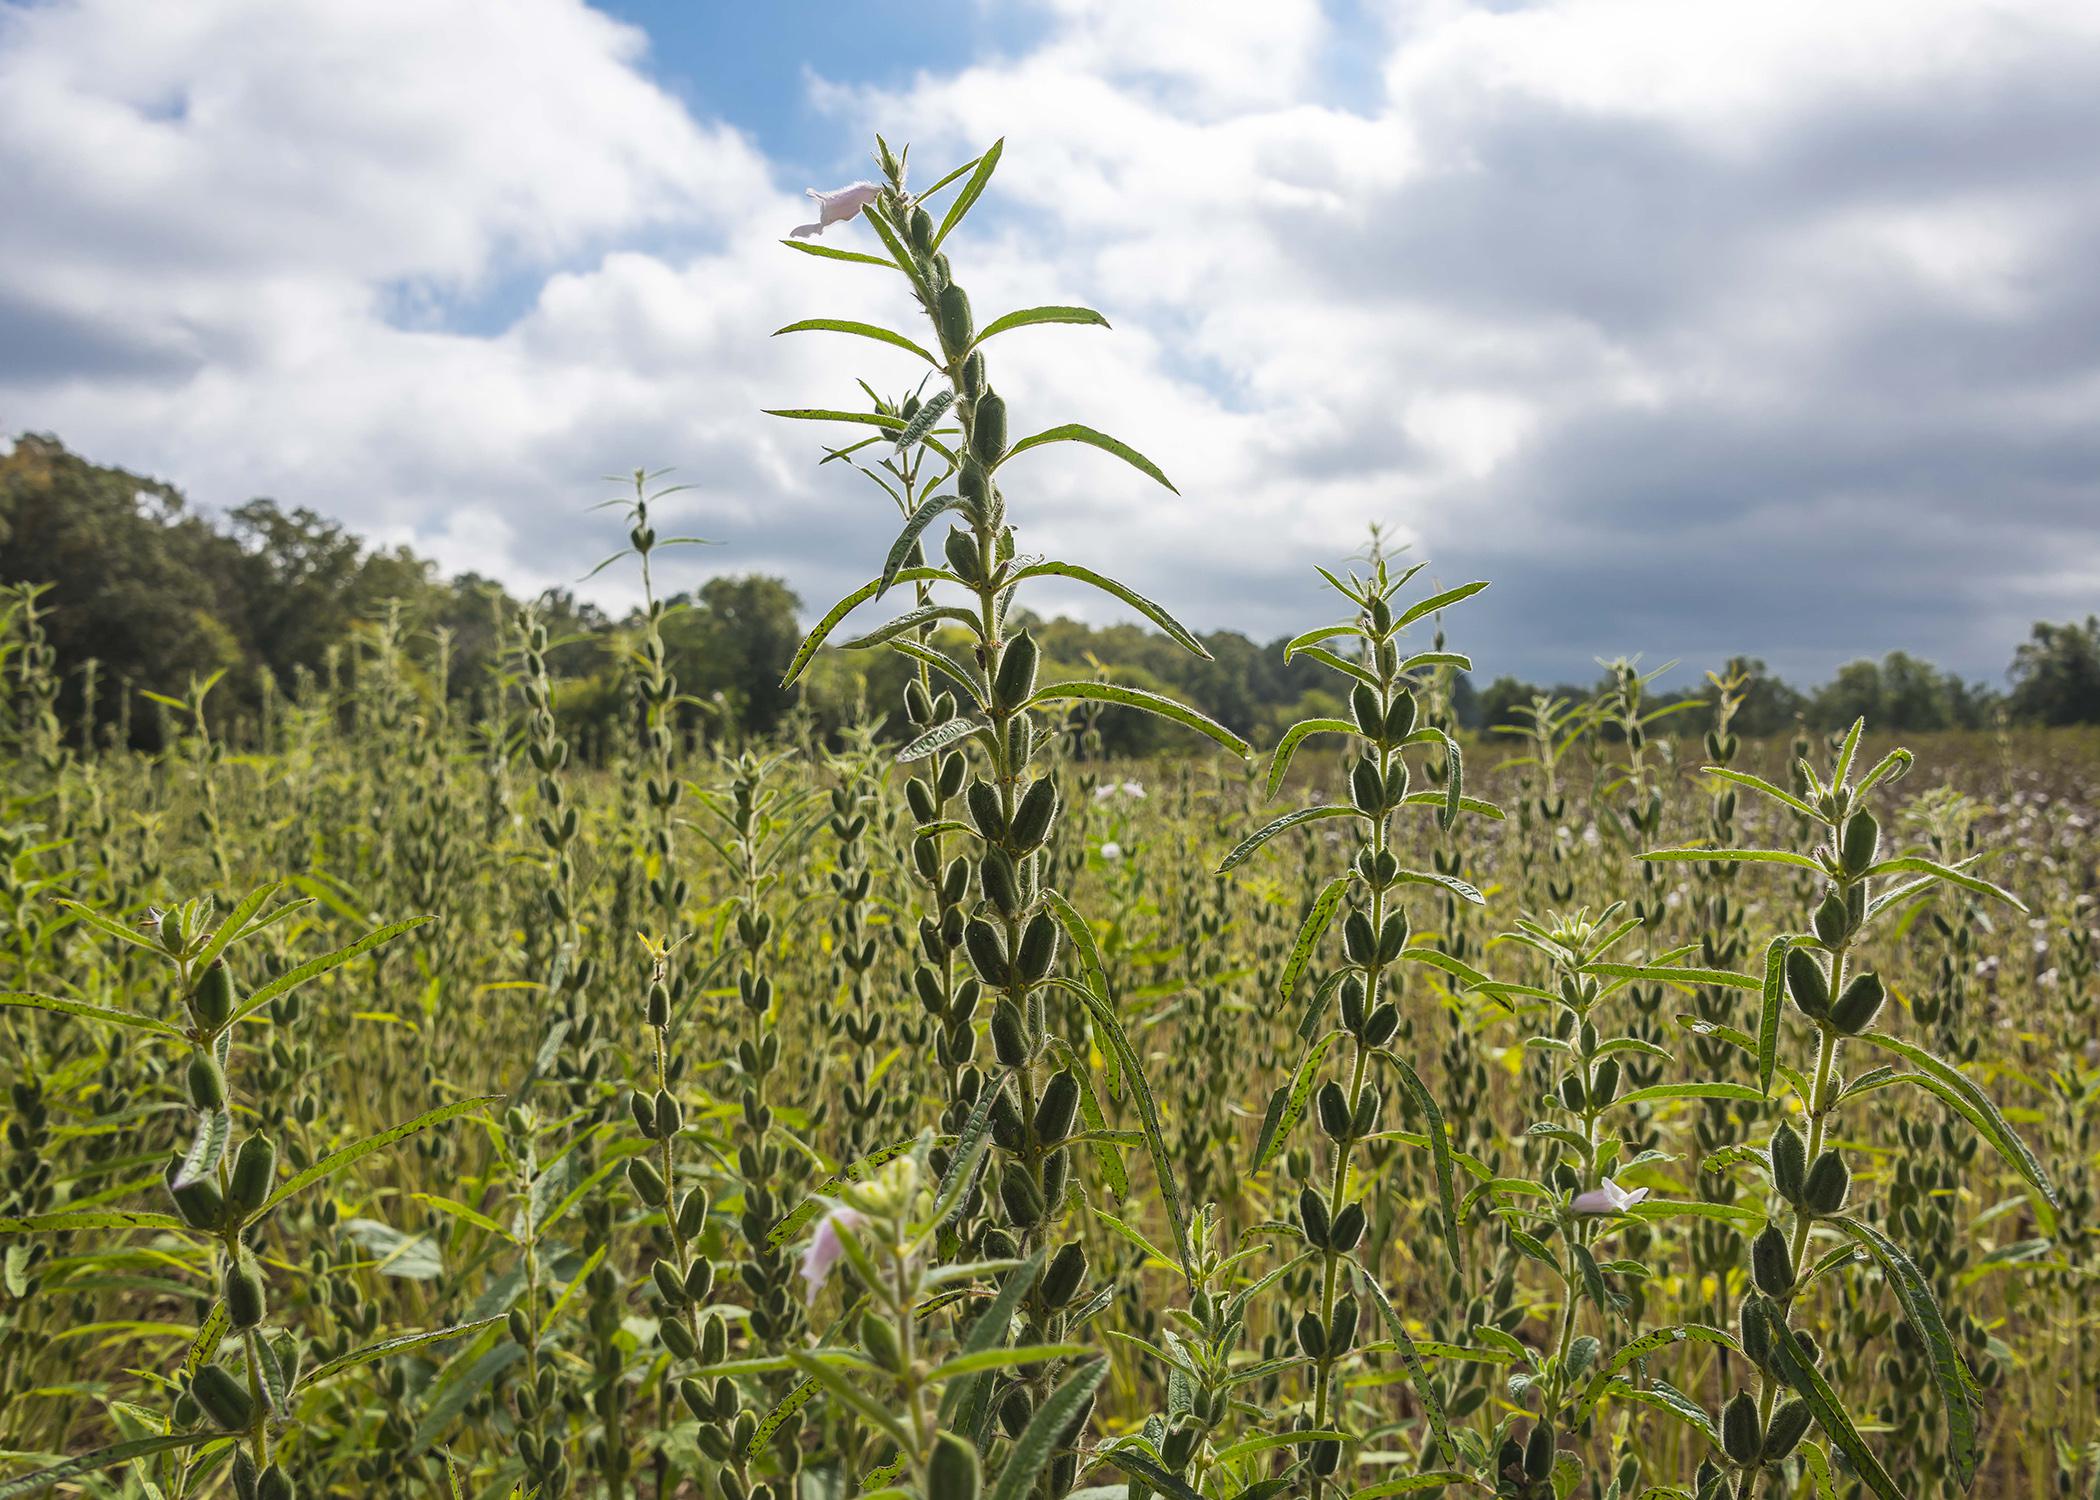 Sesame is a broadleaf summer crop with growth similar to cotton and soybeans. It can reach up to 6 feet tall with good soil moisture and fertility. (Photo by MSU Ag Communications/Kevin Hudson)